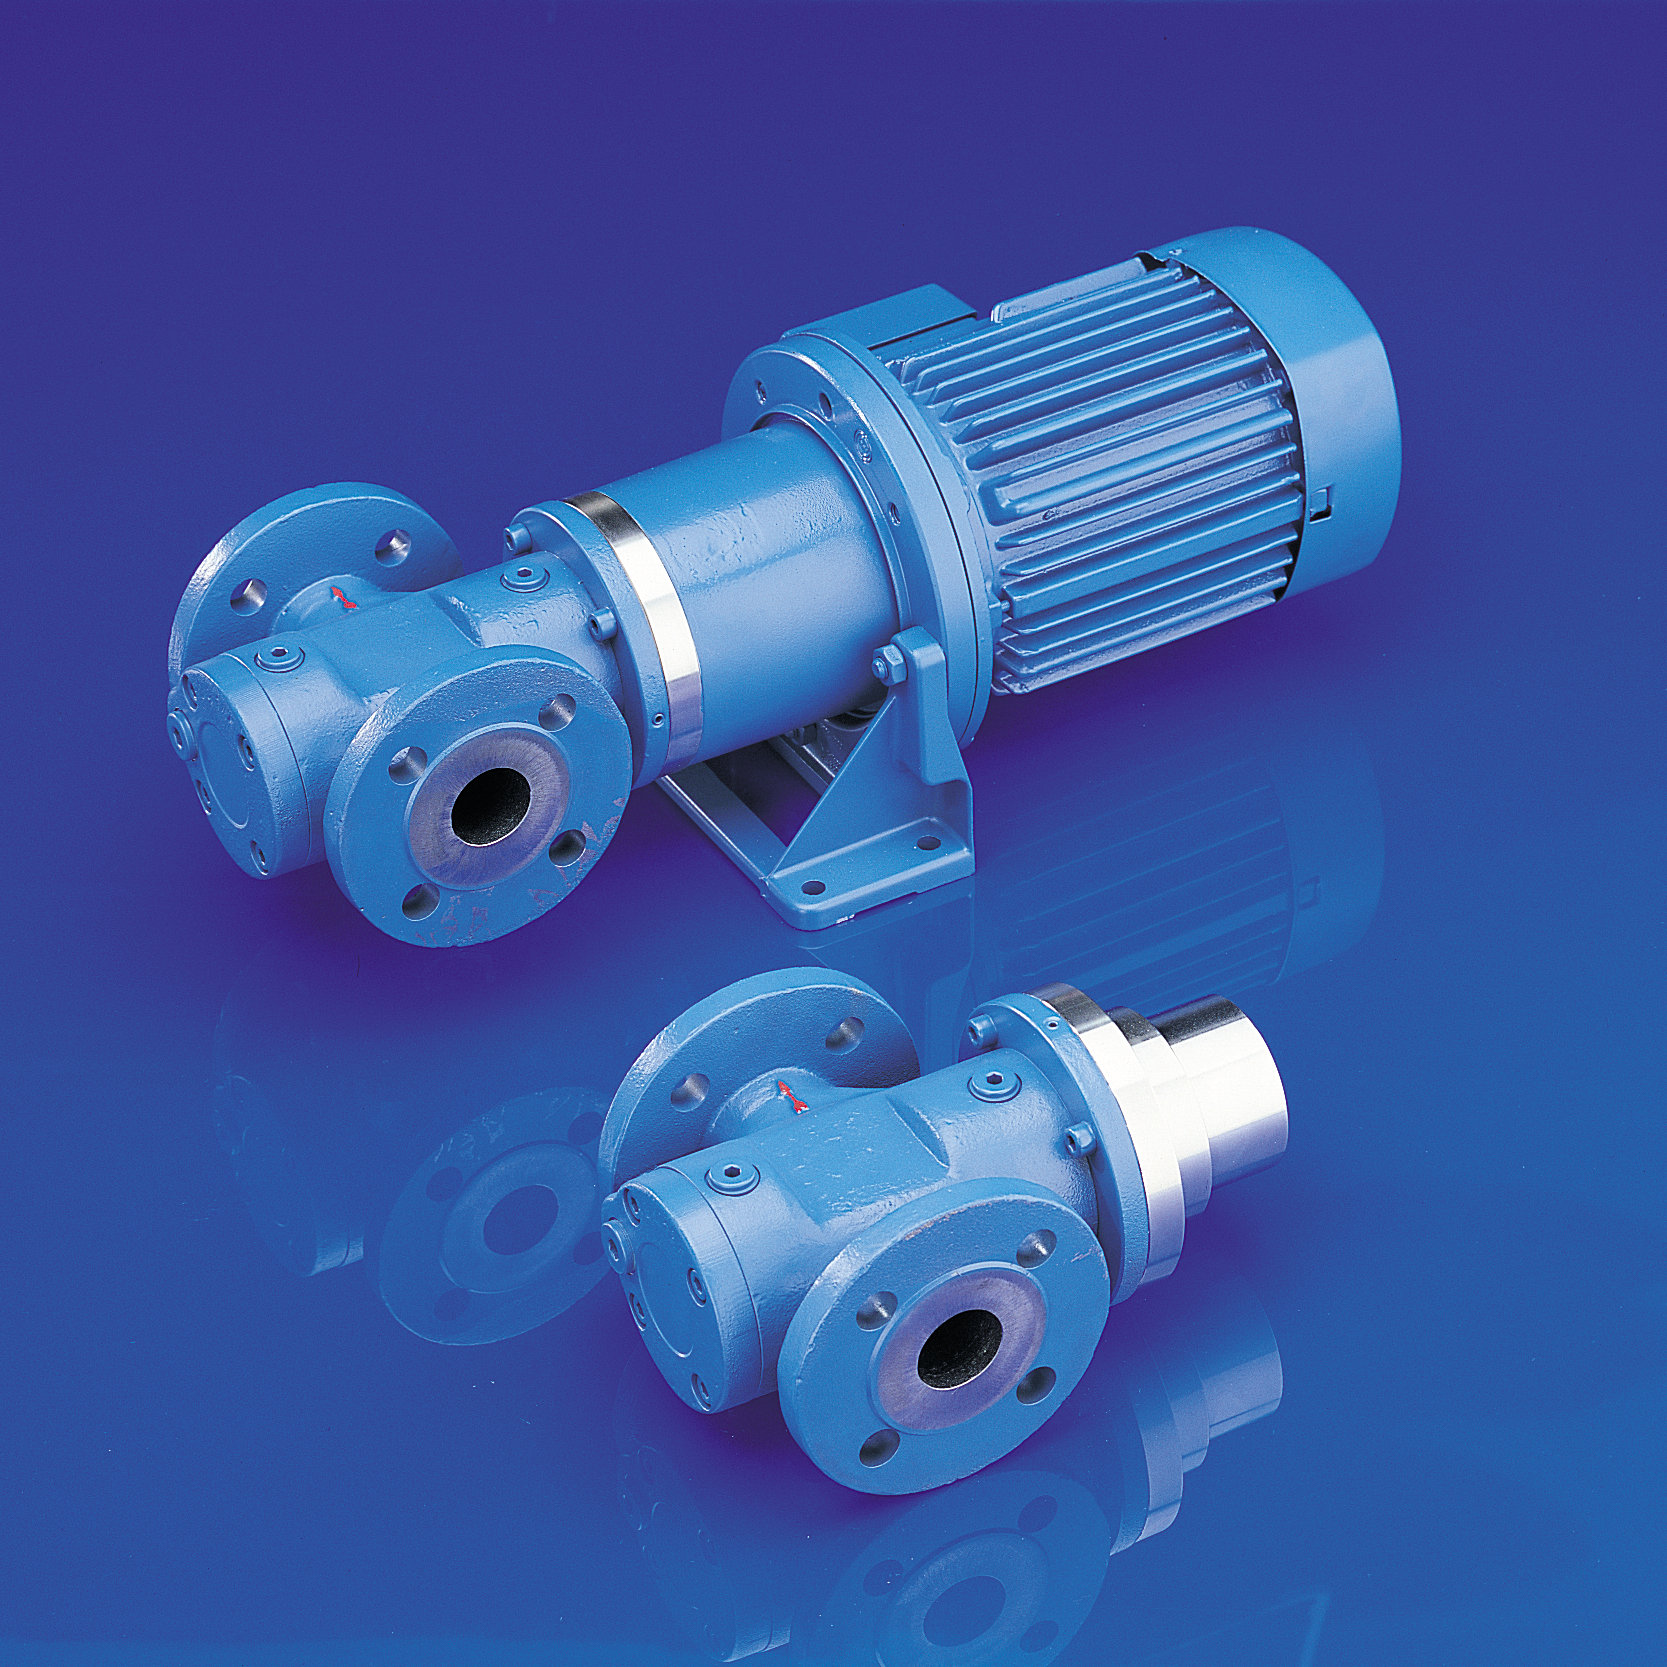 Screw pumps with magnetic coupling